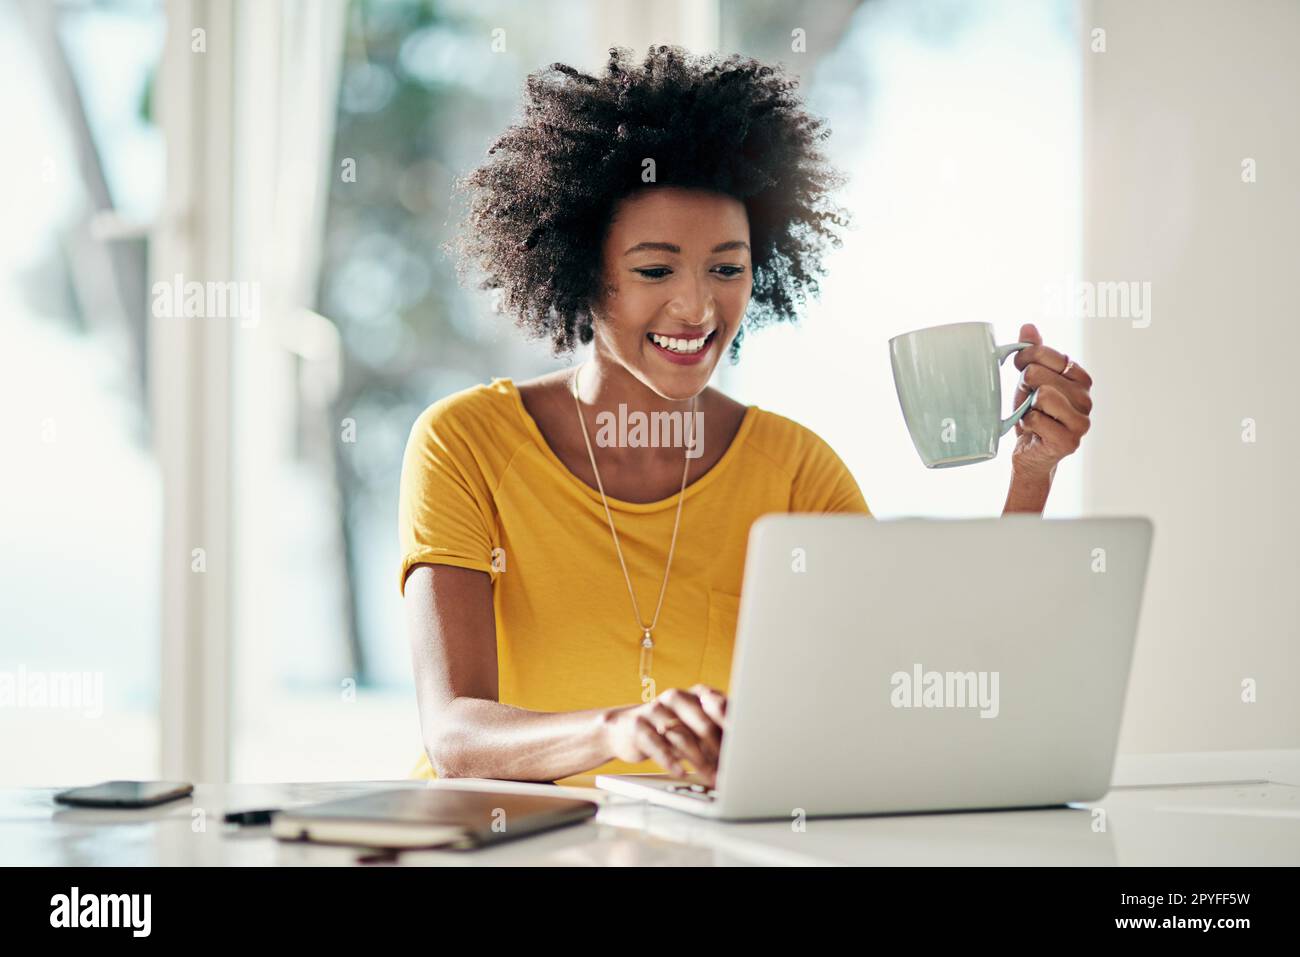 Working on her self-owned business. an attractive young woman working on her laptop at home. Stock Photo